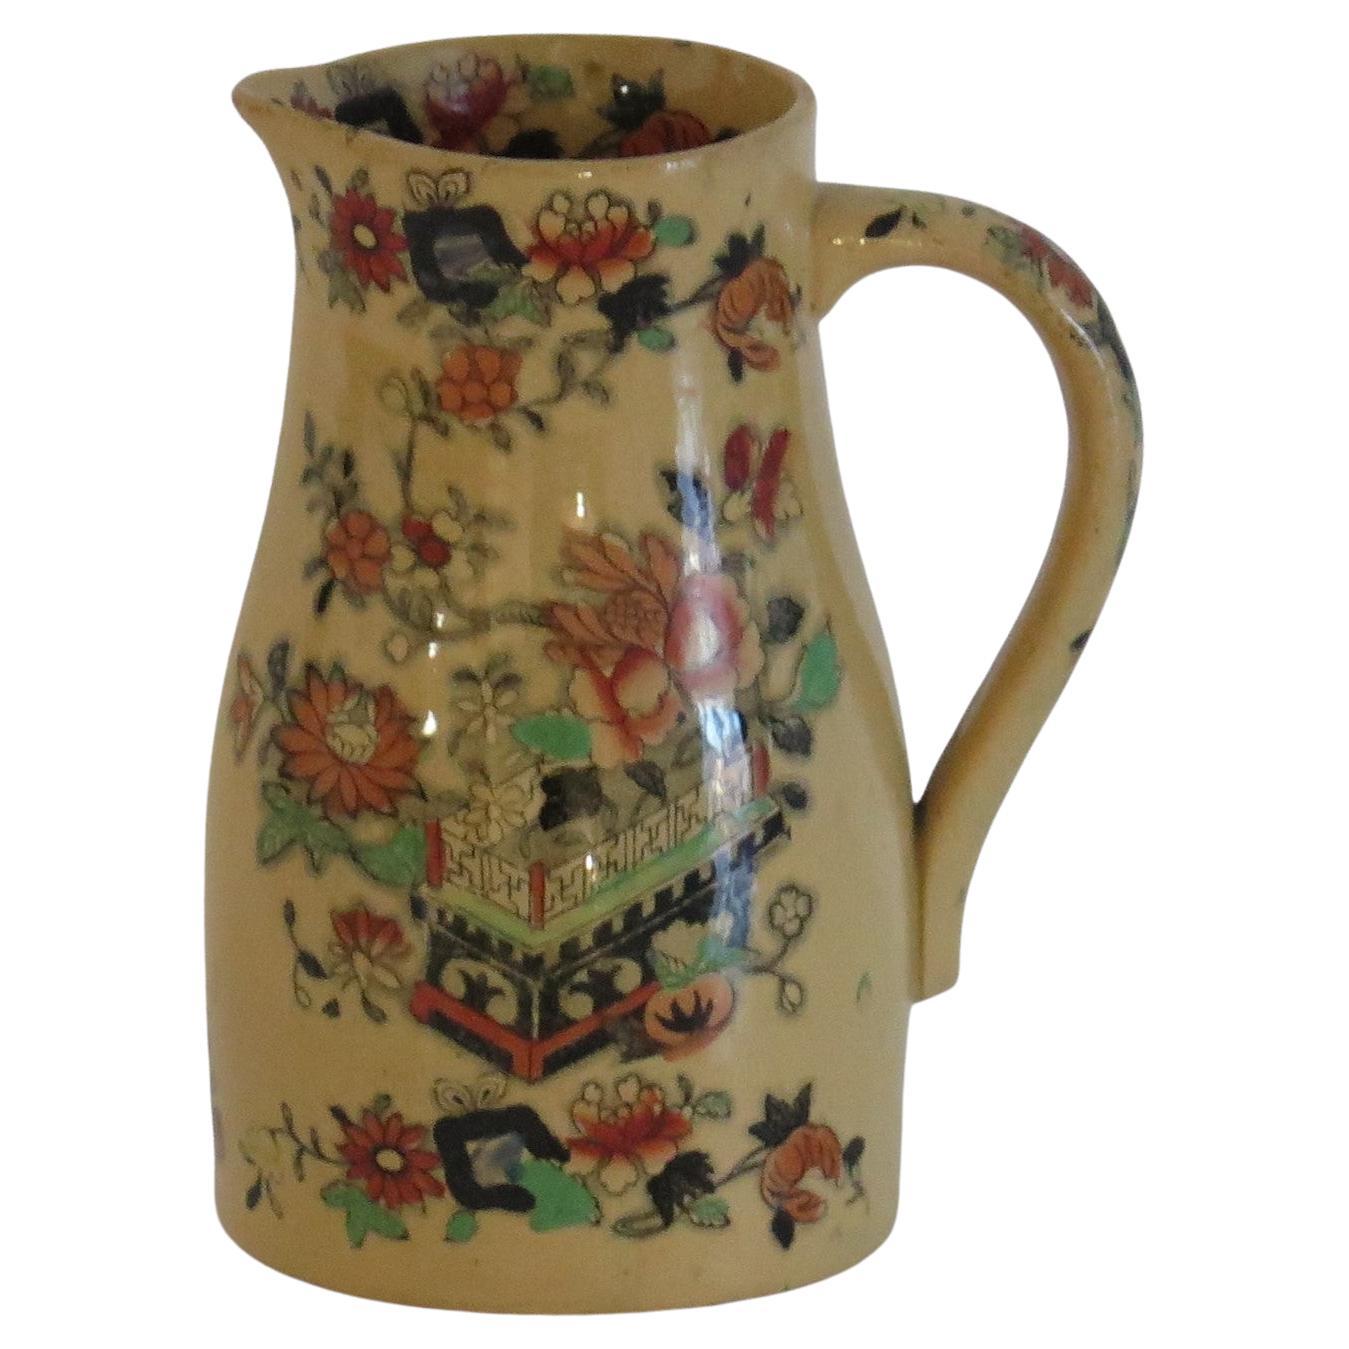 Mason's Ironstone Jug or Pitcher in Flower Box hand painted Pattern, circa 1840